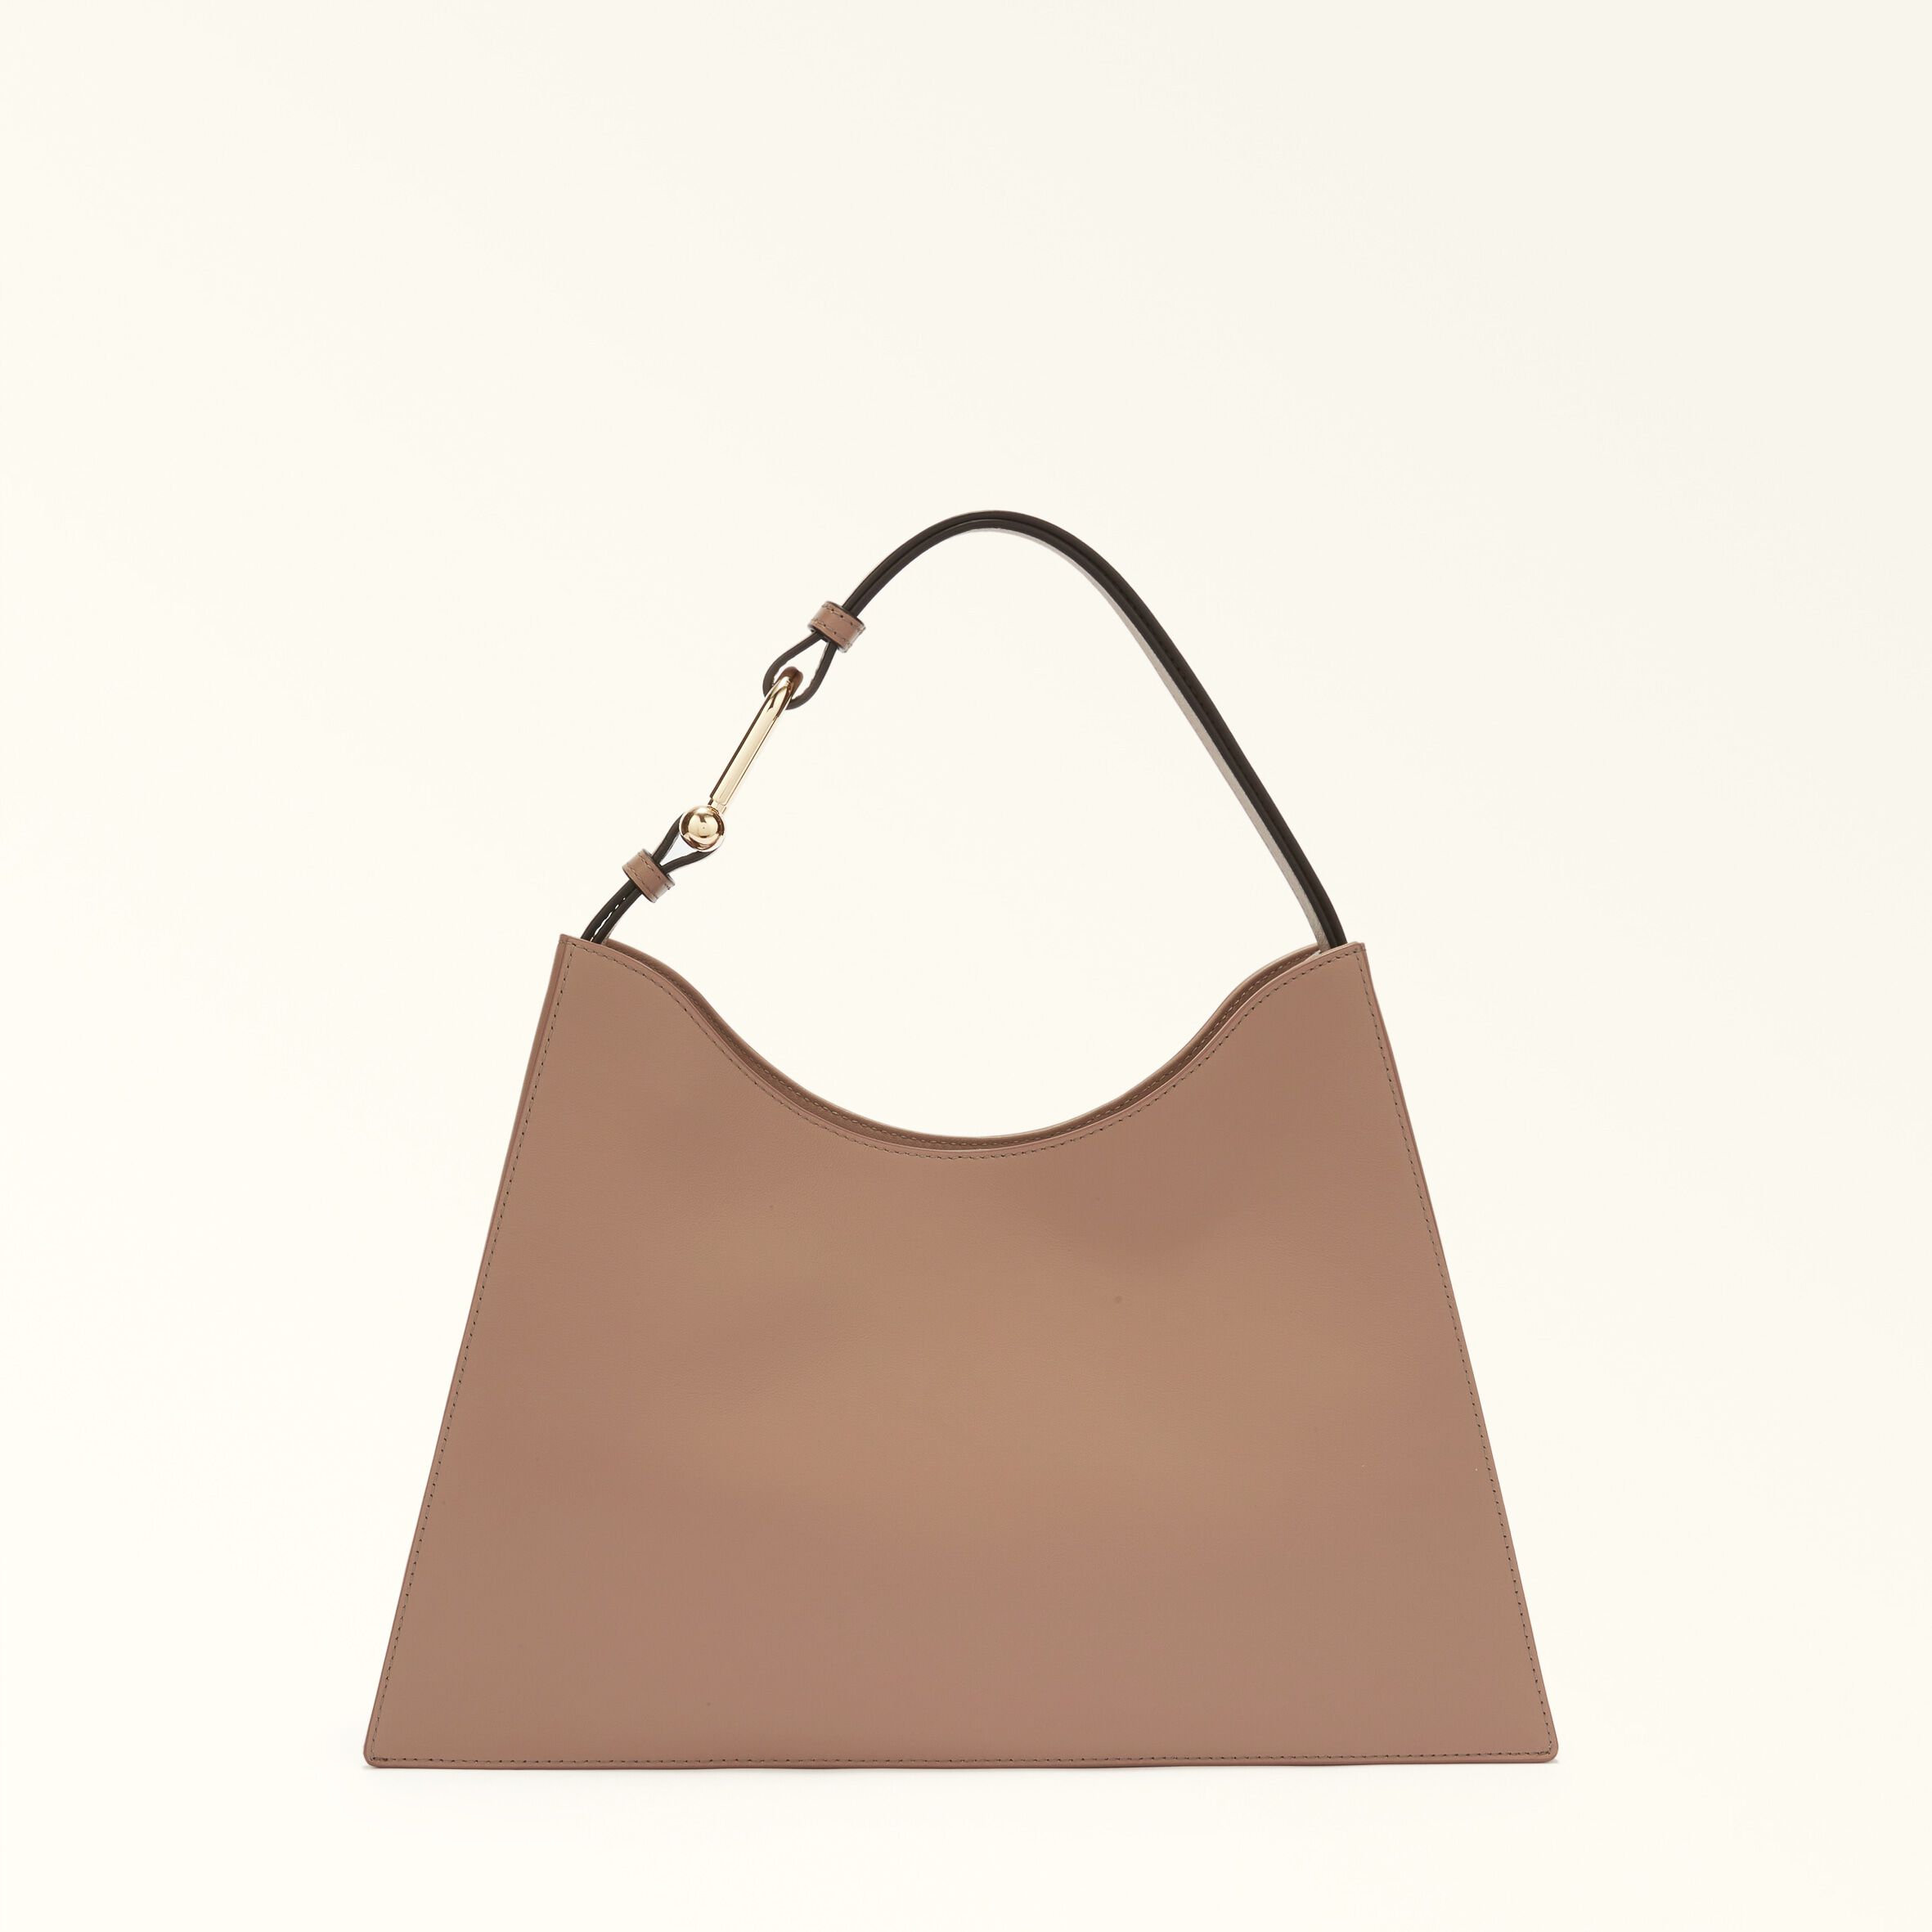 Women's bags, wallets, shoes and accessories | Furla